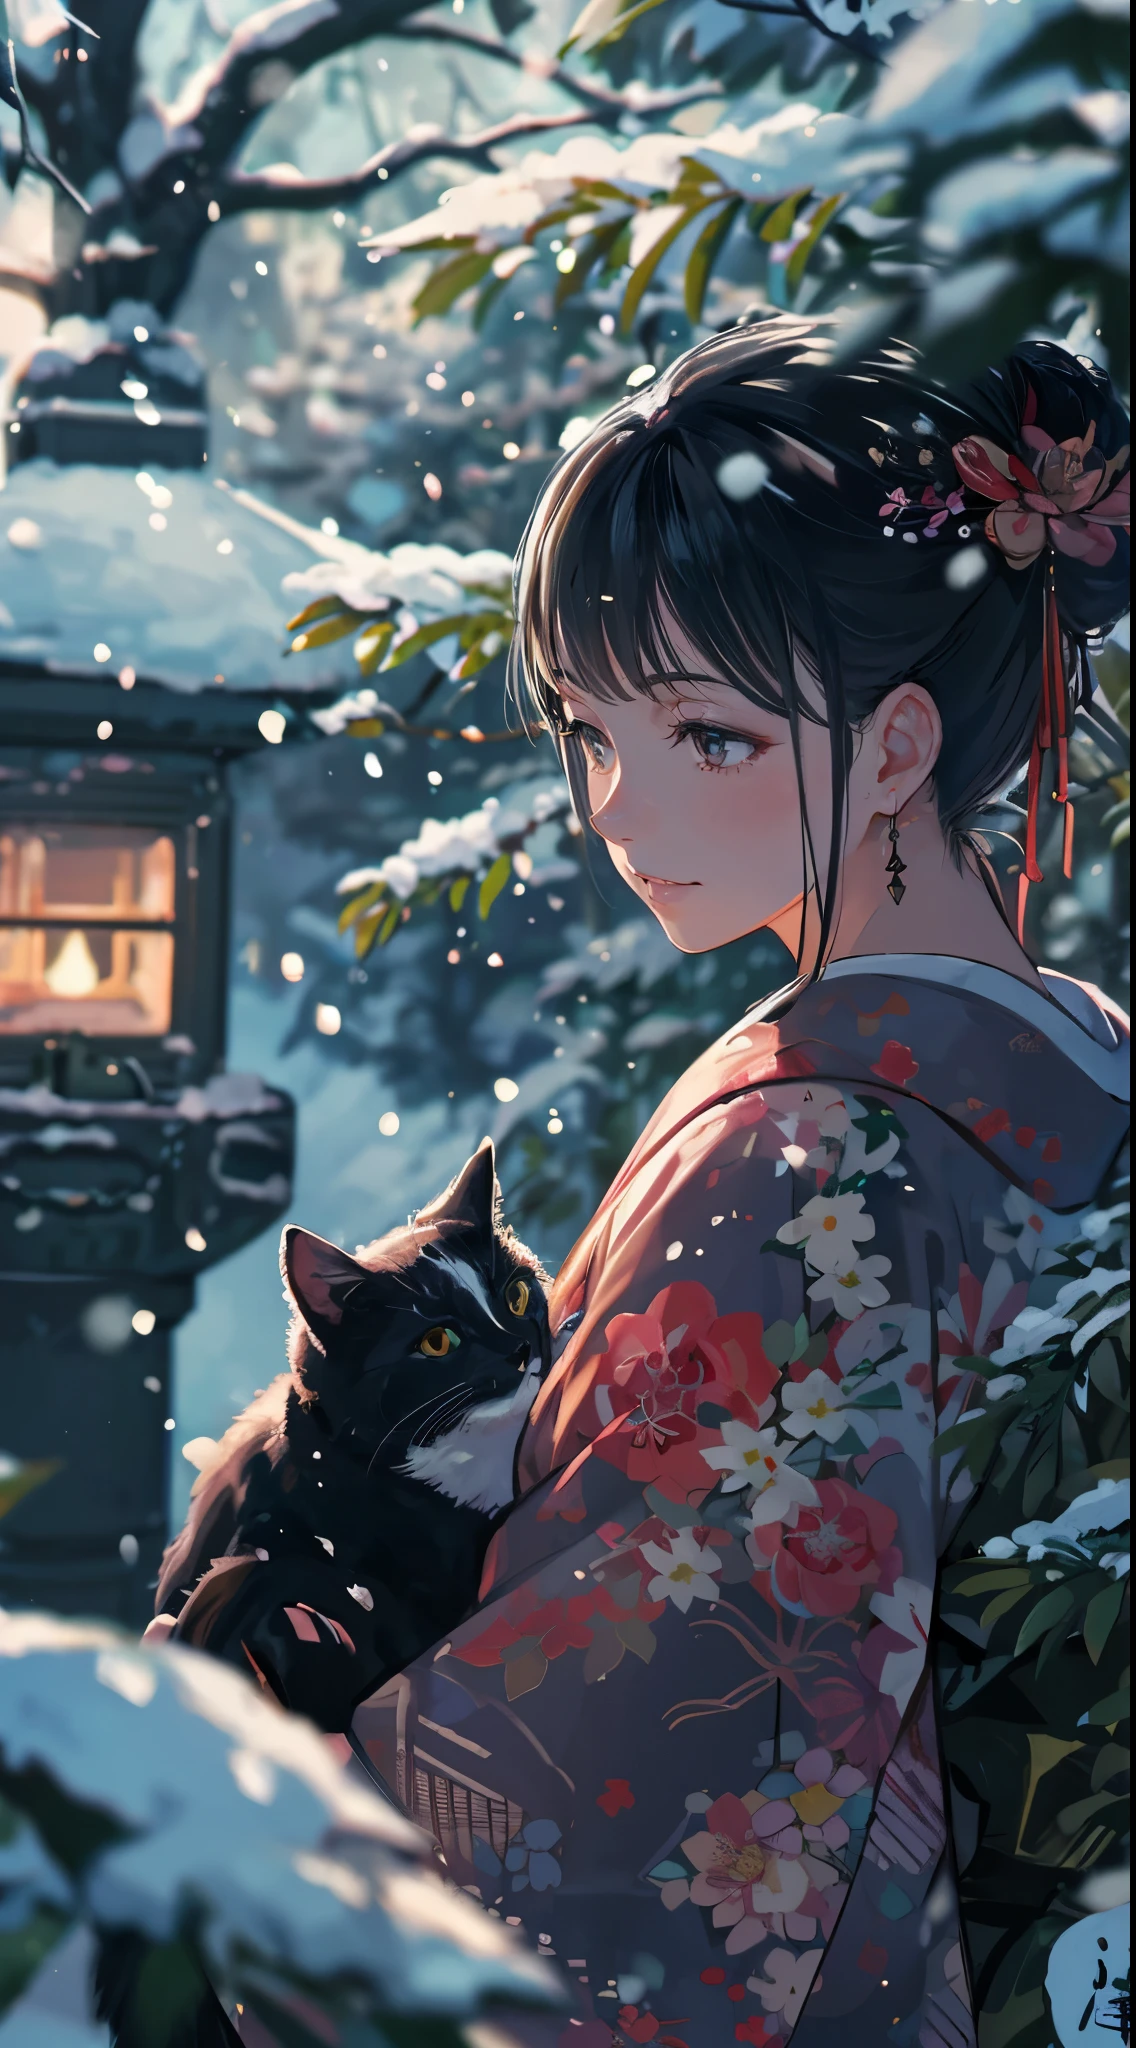 high quality, close-up on woman, amount of drawing, pixiv illustration, A beautiful young woman celebrates the New Year in a traditional Japanese setting. The moment just before he picks up a black cat and kisses it. A quiet garden covered with snow. The garden has a small pine tree and a stone lantern covered with snow, softly illuminated by the early morning light of the New Year. features are smooth black hair, styled in a classic style, and deep brown eyes that reflect the hopeful beginning of the New Year